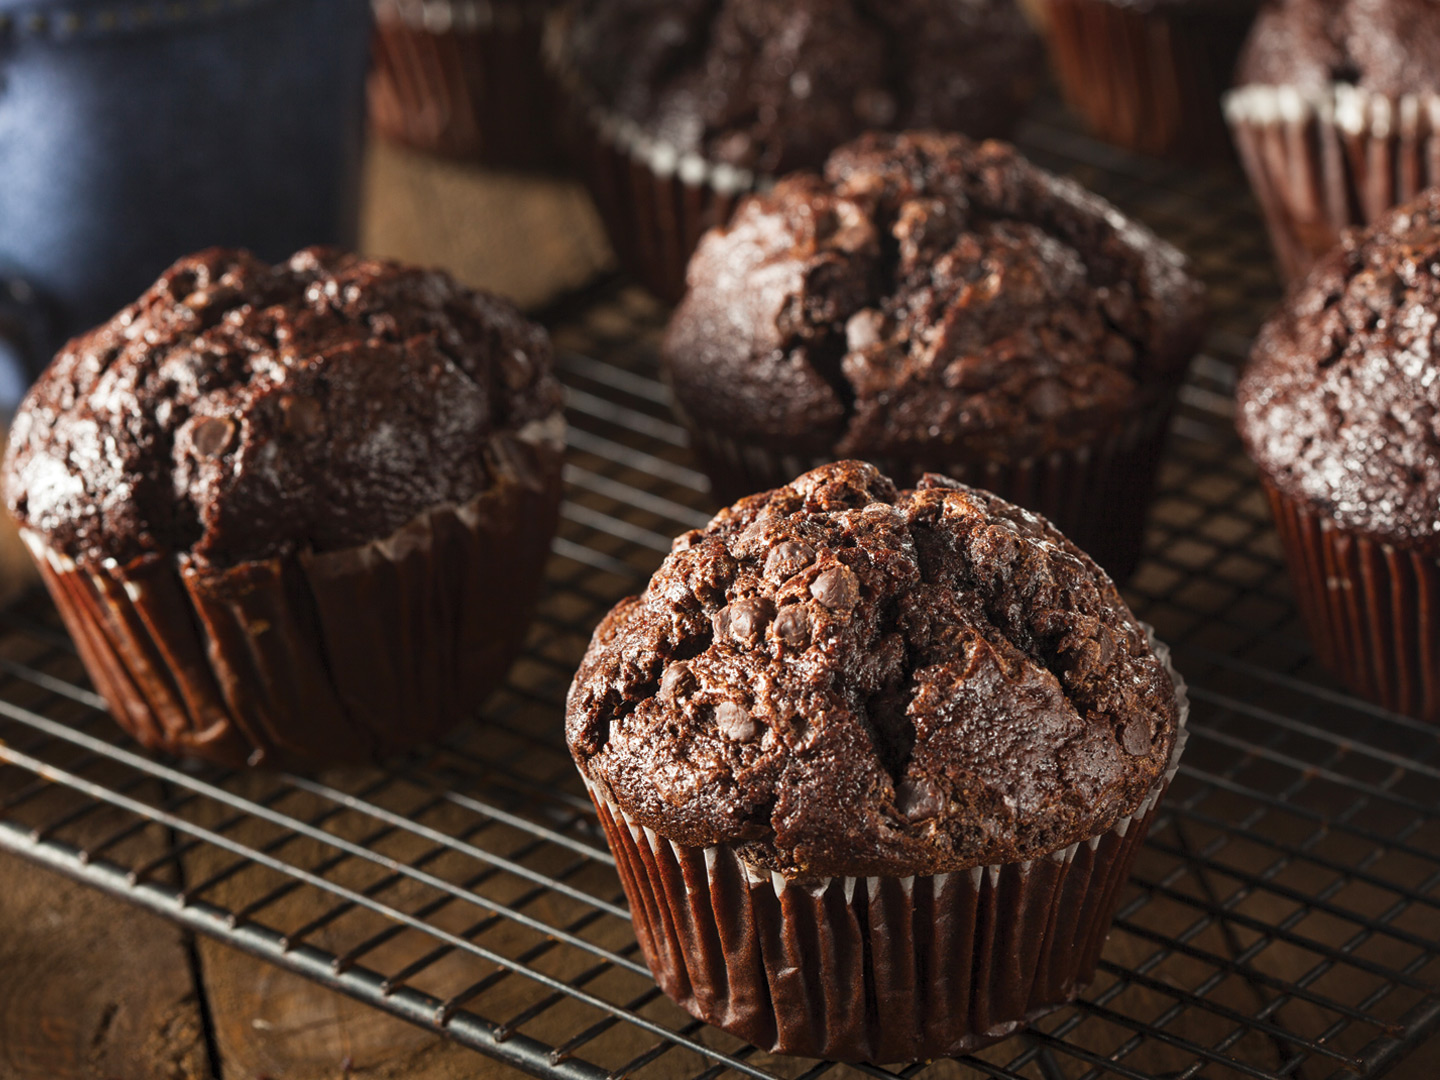 Tasty Tuesday – Chocolate Protein Muffins